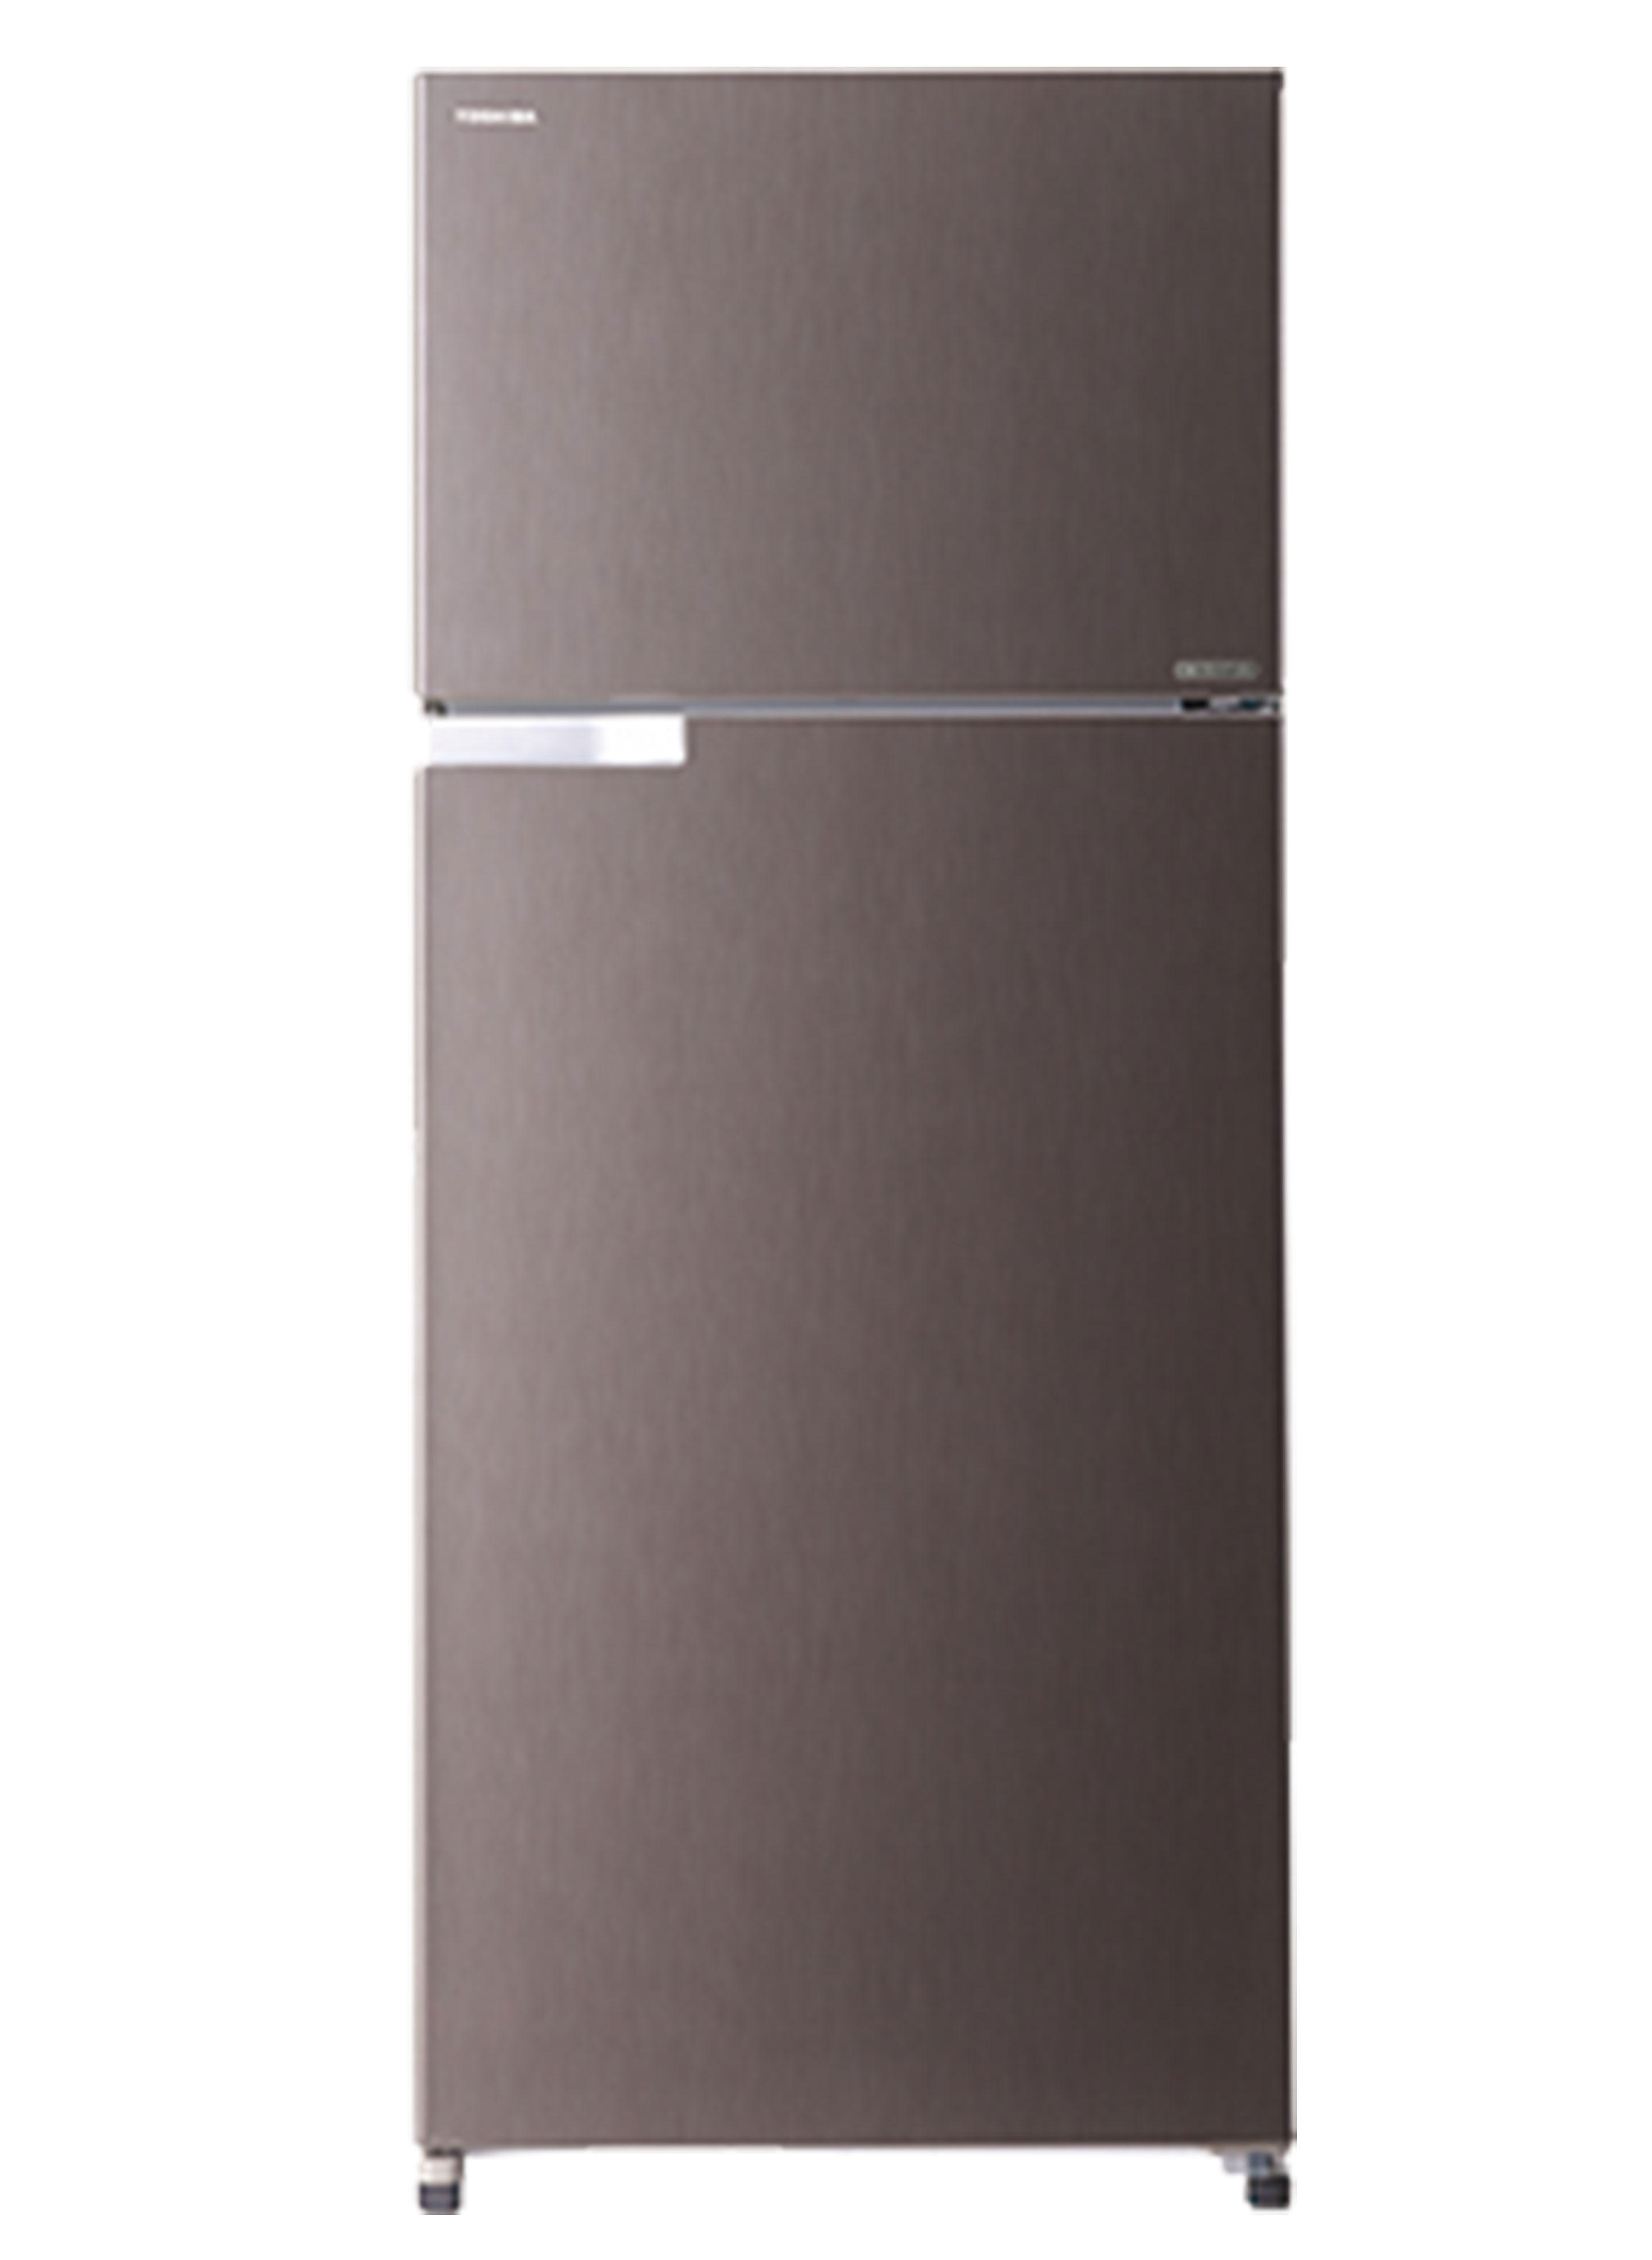 505L Refrigerator Reddish Gold Out Side View